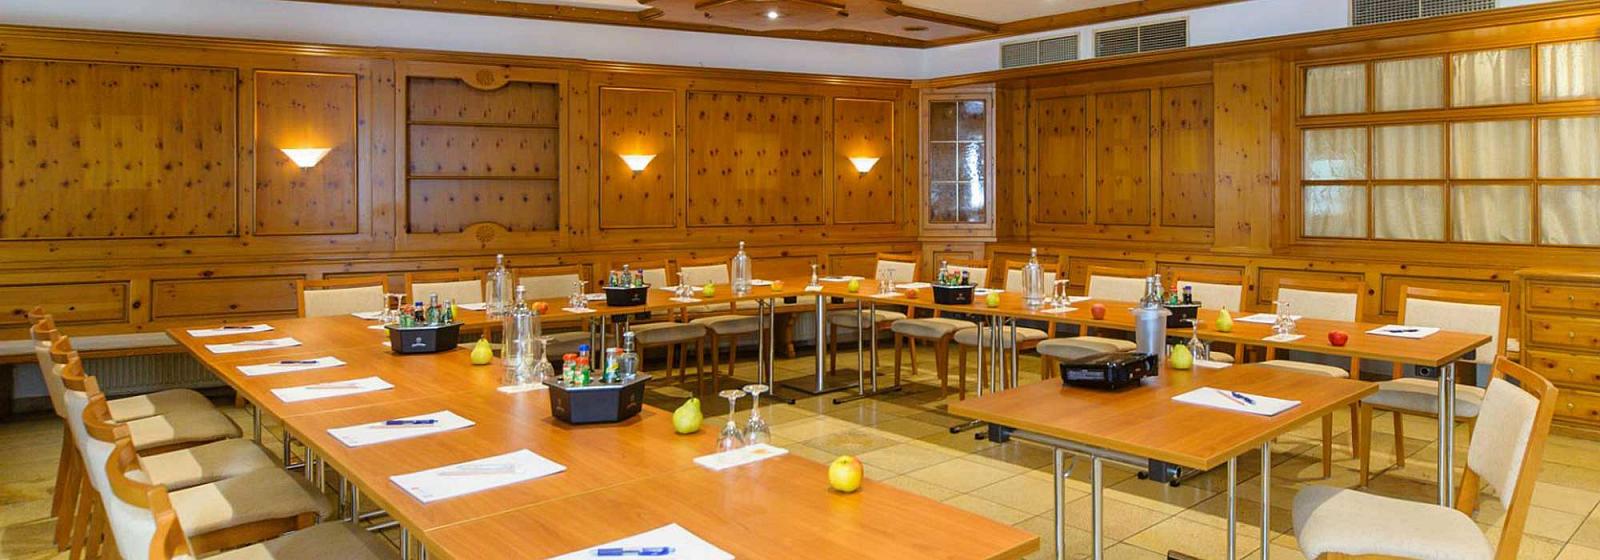 Akzent-Hotel Goldner Stern: Conference Rooms Overview